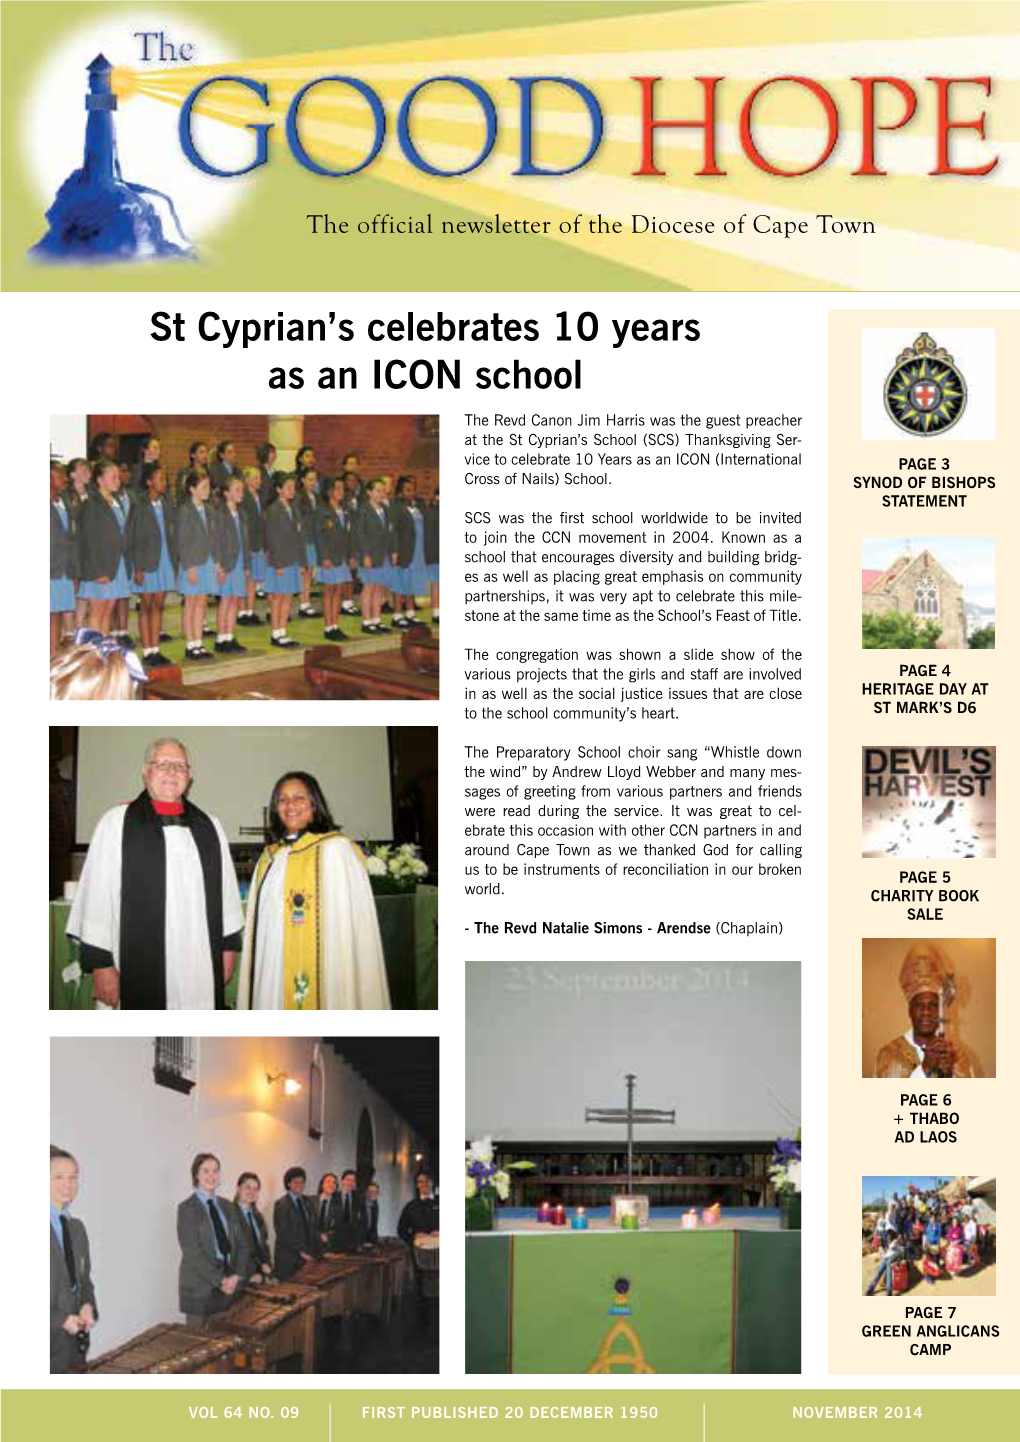 St Cyprian's Celebrates 10 Years As an ICON School